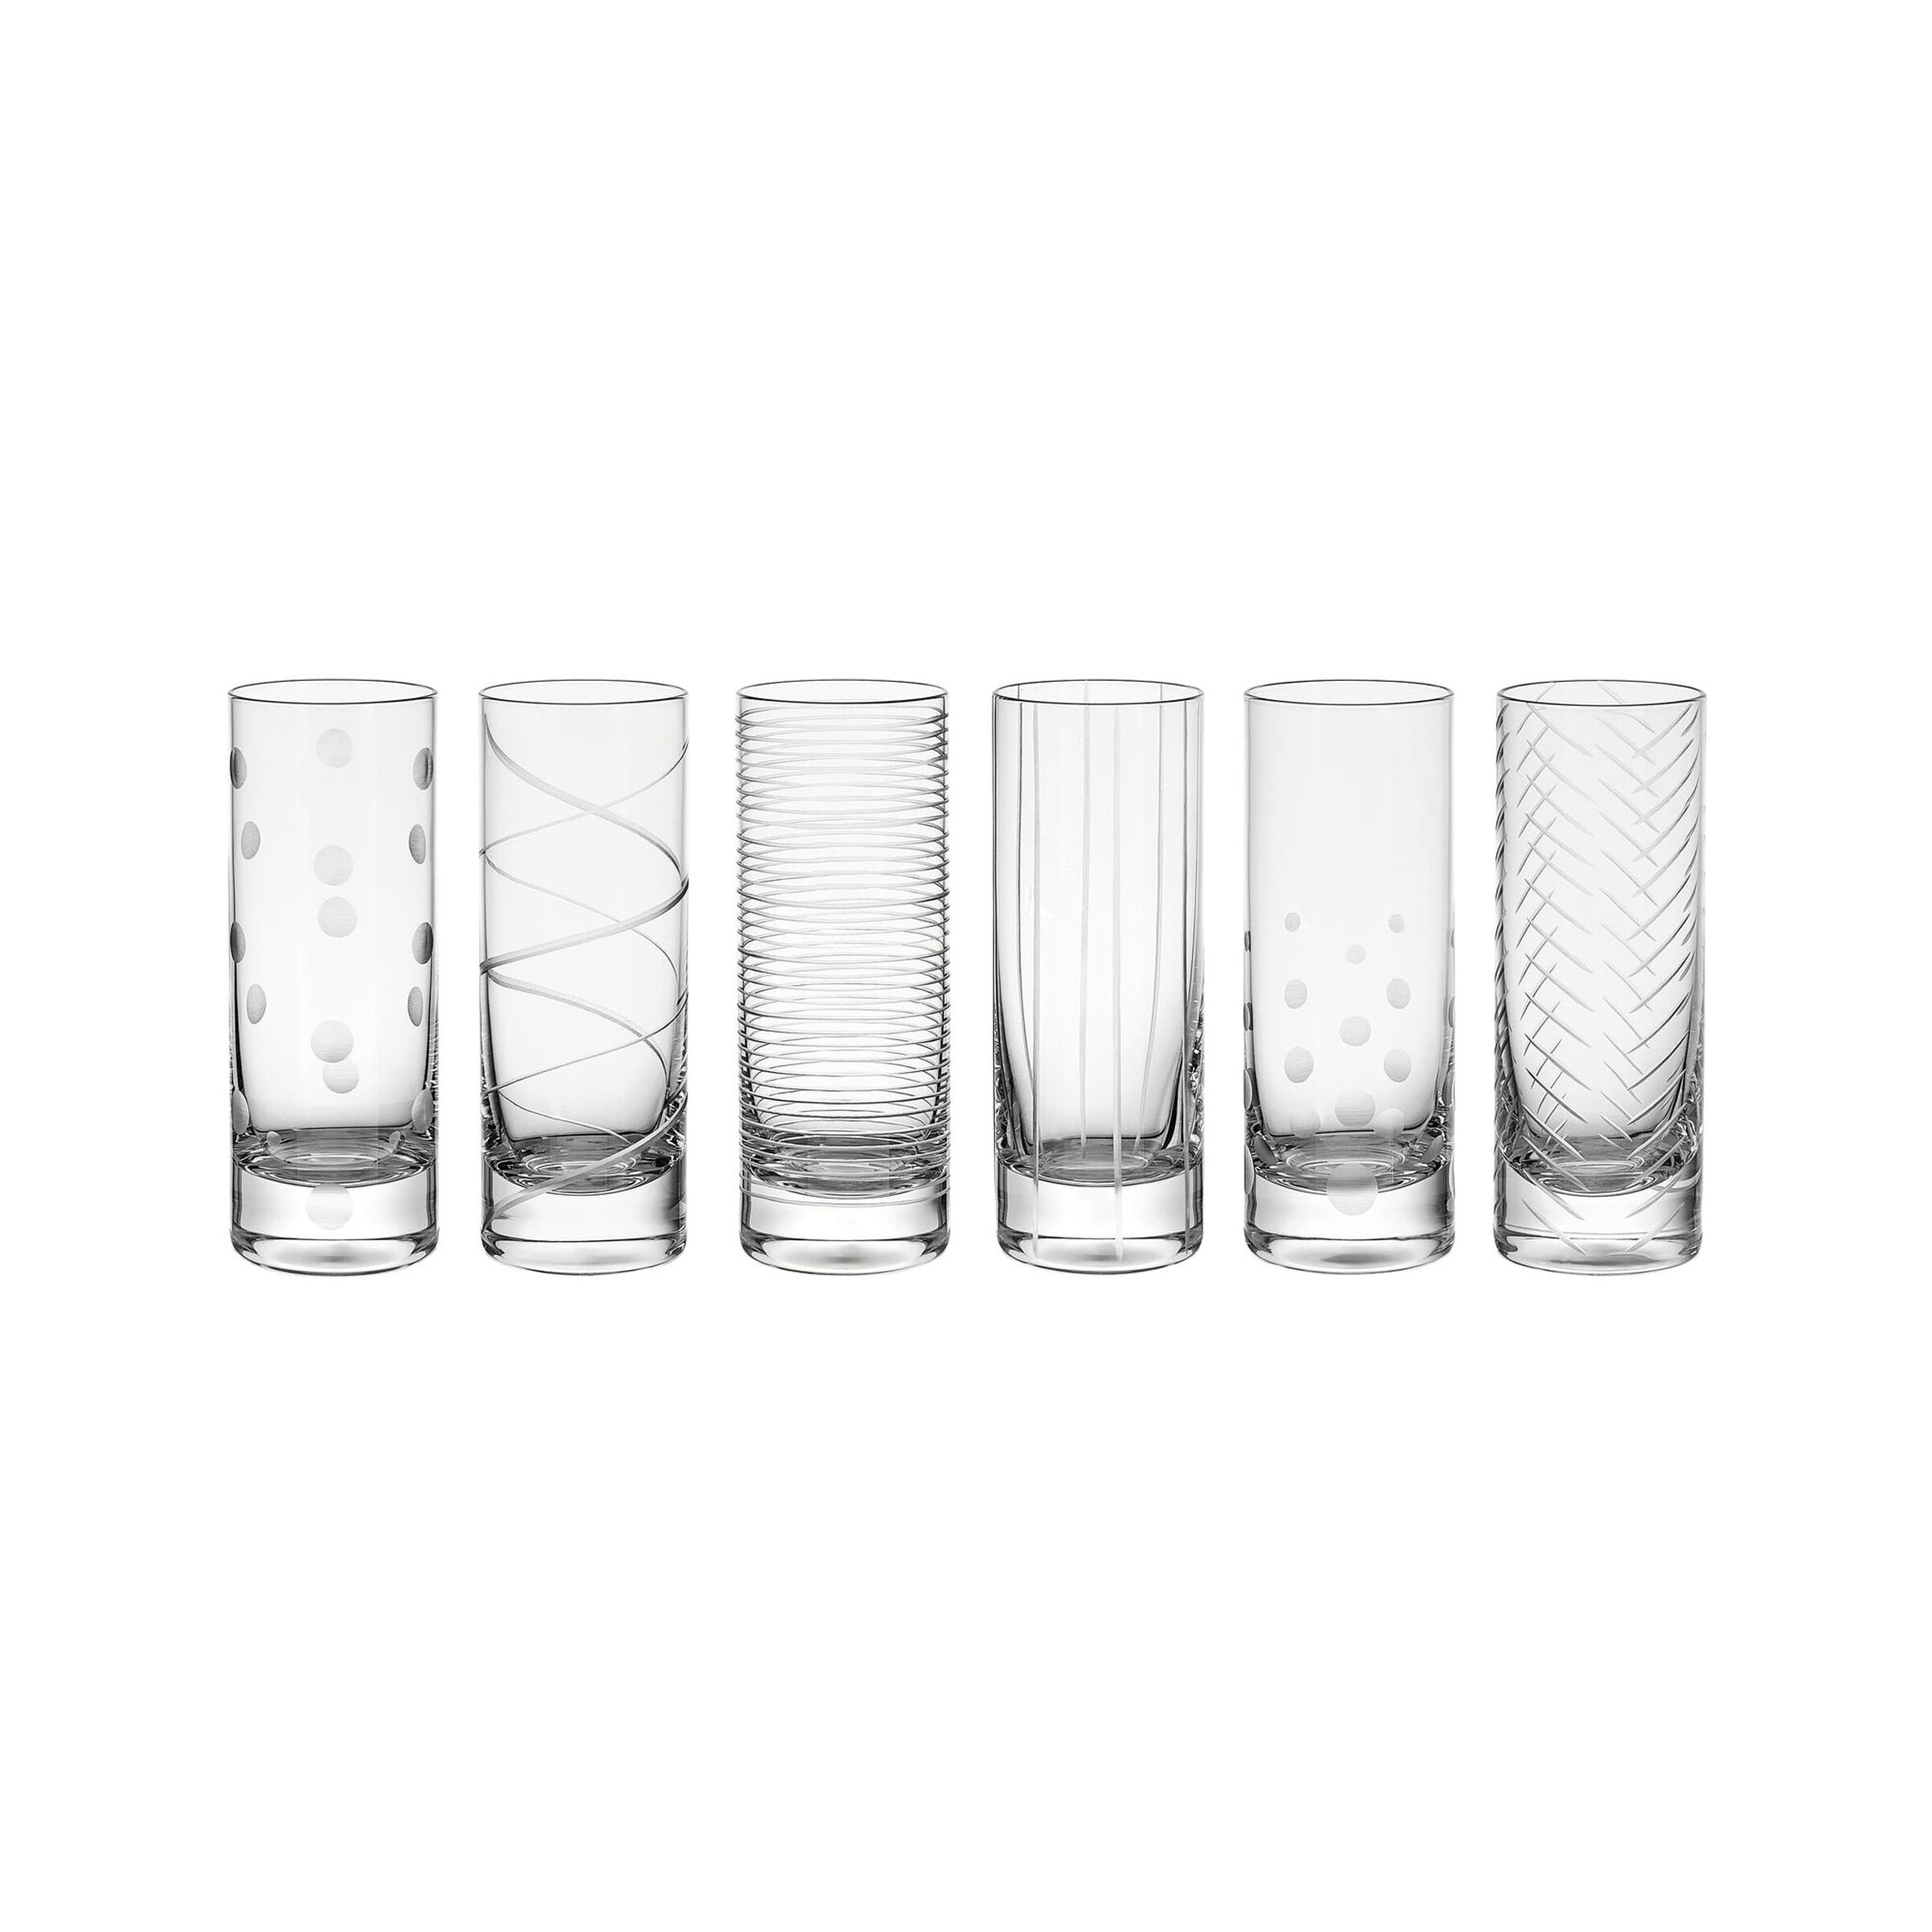 https://ak1.ostkcdn.com/images/products/is/images/direct/a9693d62b707c7bd44a89b3c48e17807686612dd/Mikasa-Cheers-Shot-Glasses%2C-Set-Of-6.jpg